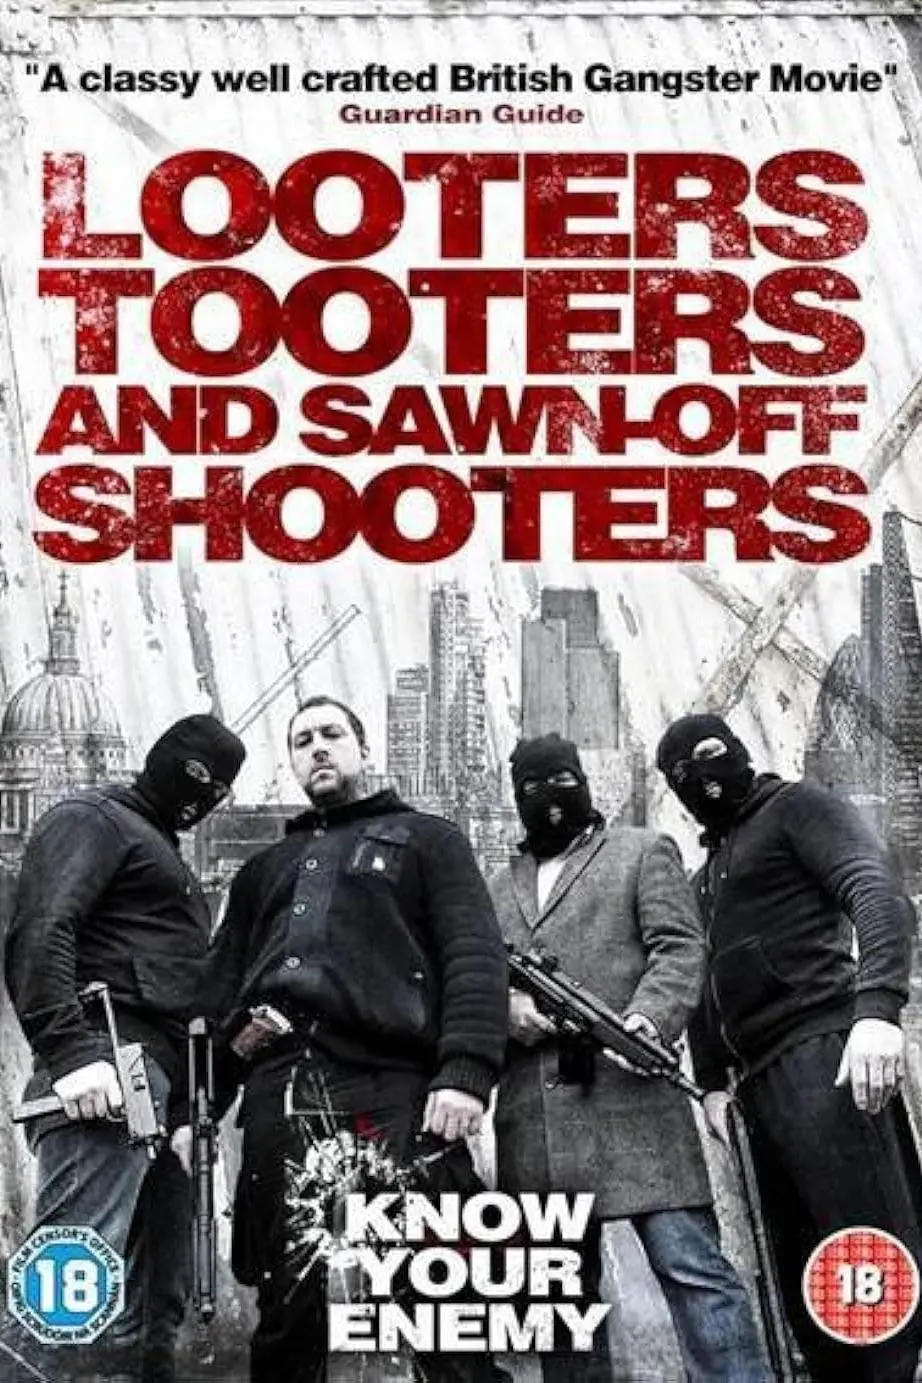 Looters, Tooters and Sawn-Off Shooters_peliplat